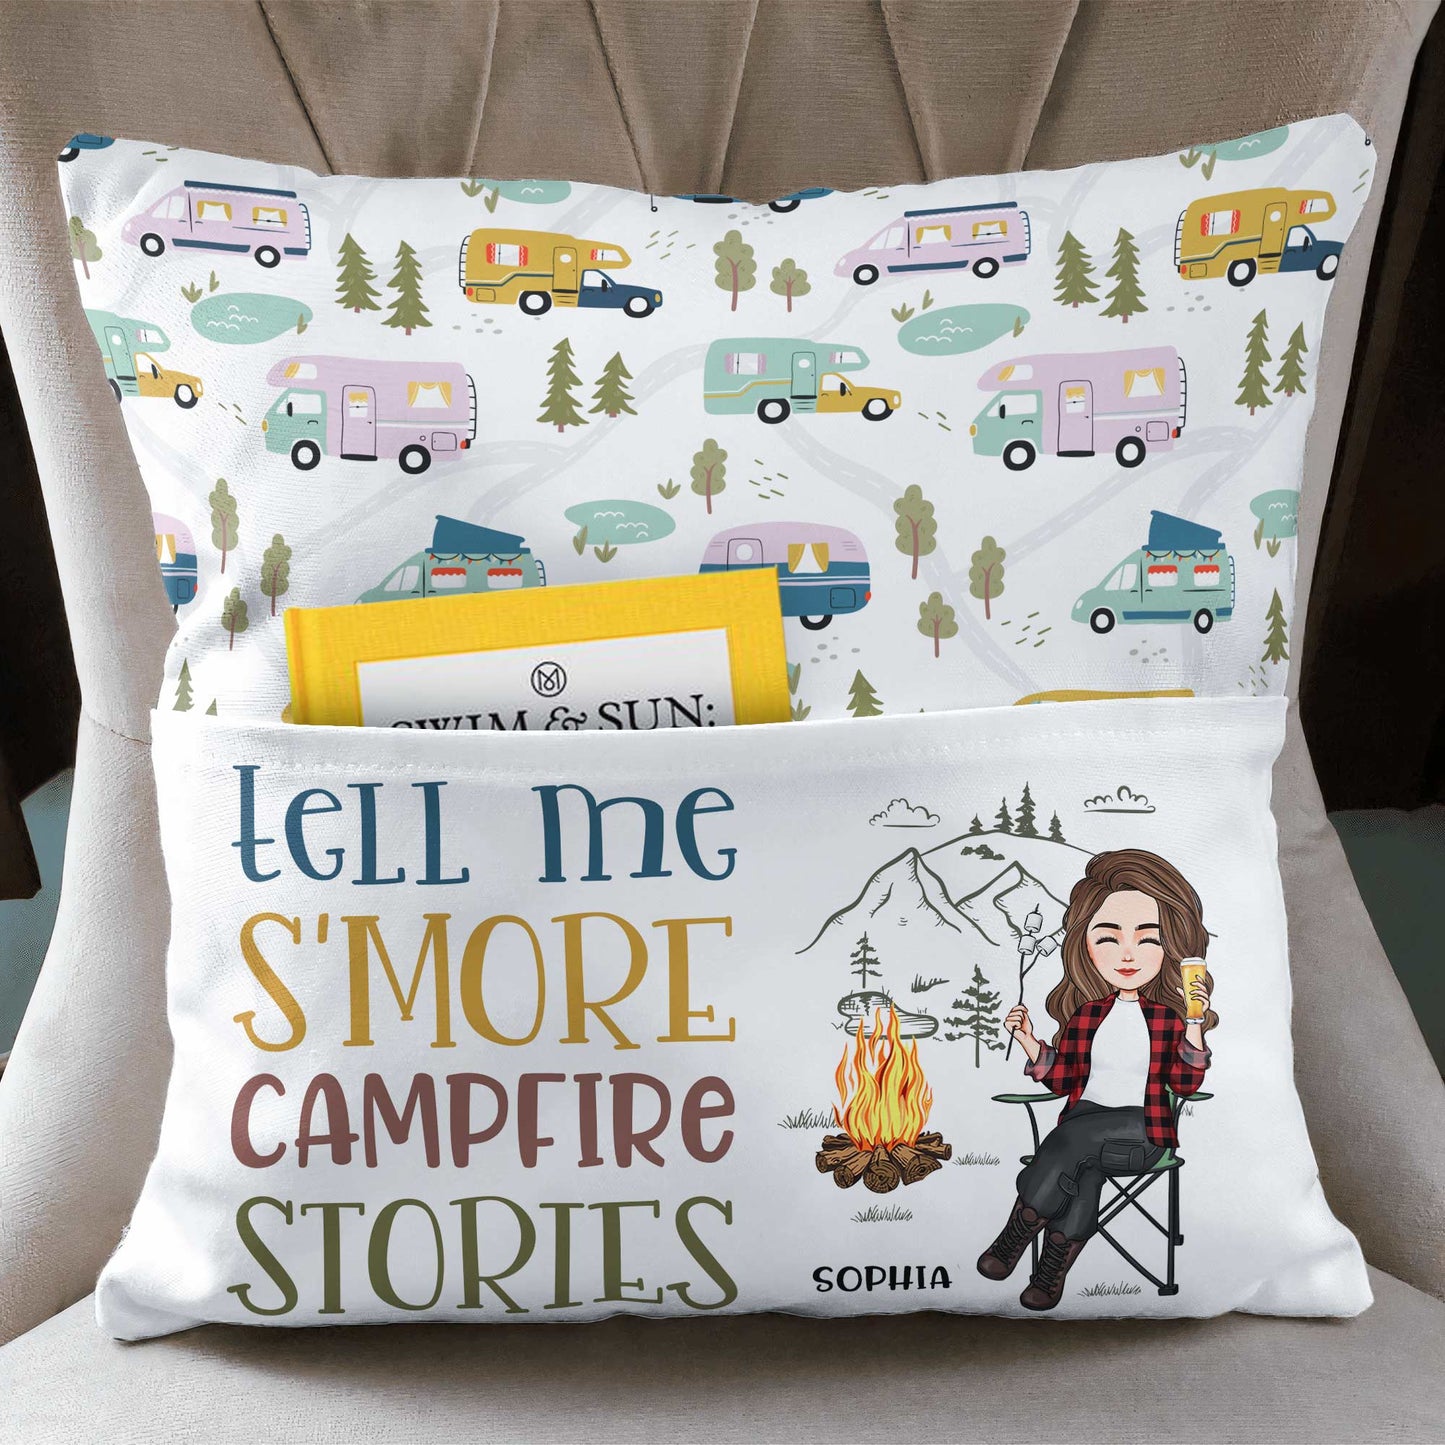 Tell Me S'more Campfire Stories - Personalized Pocket Pillow (Insert Included)